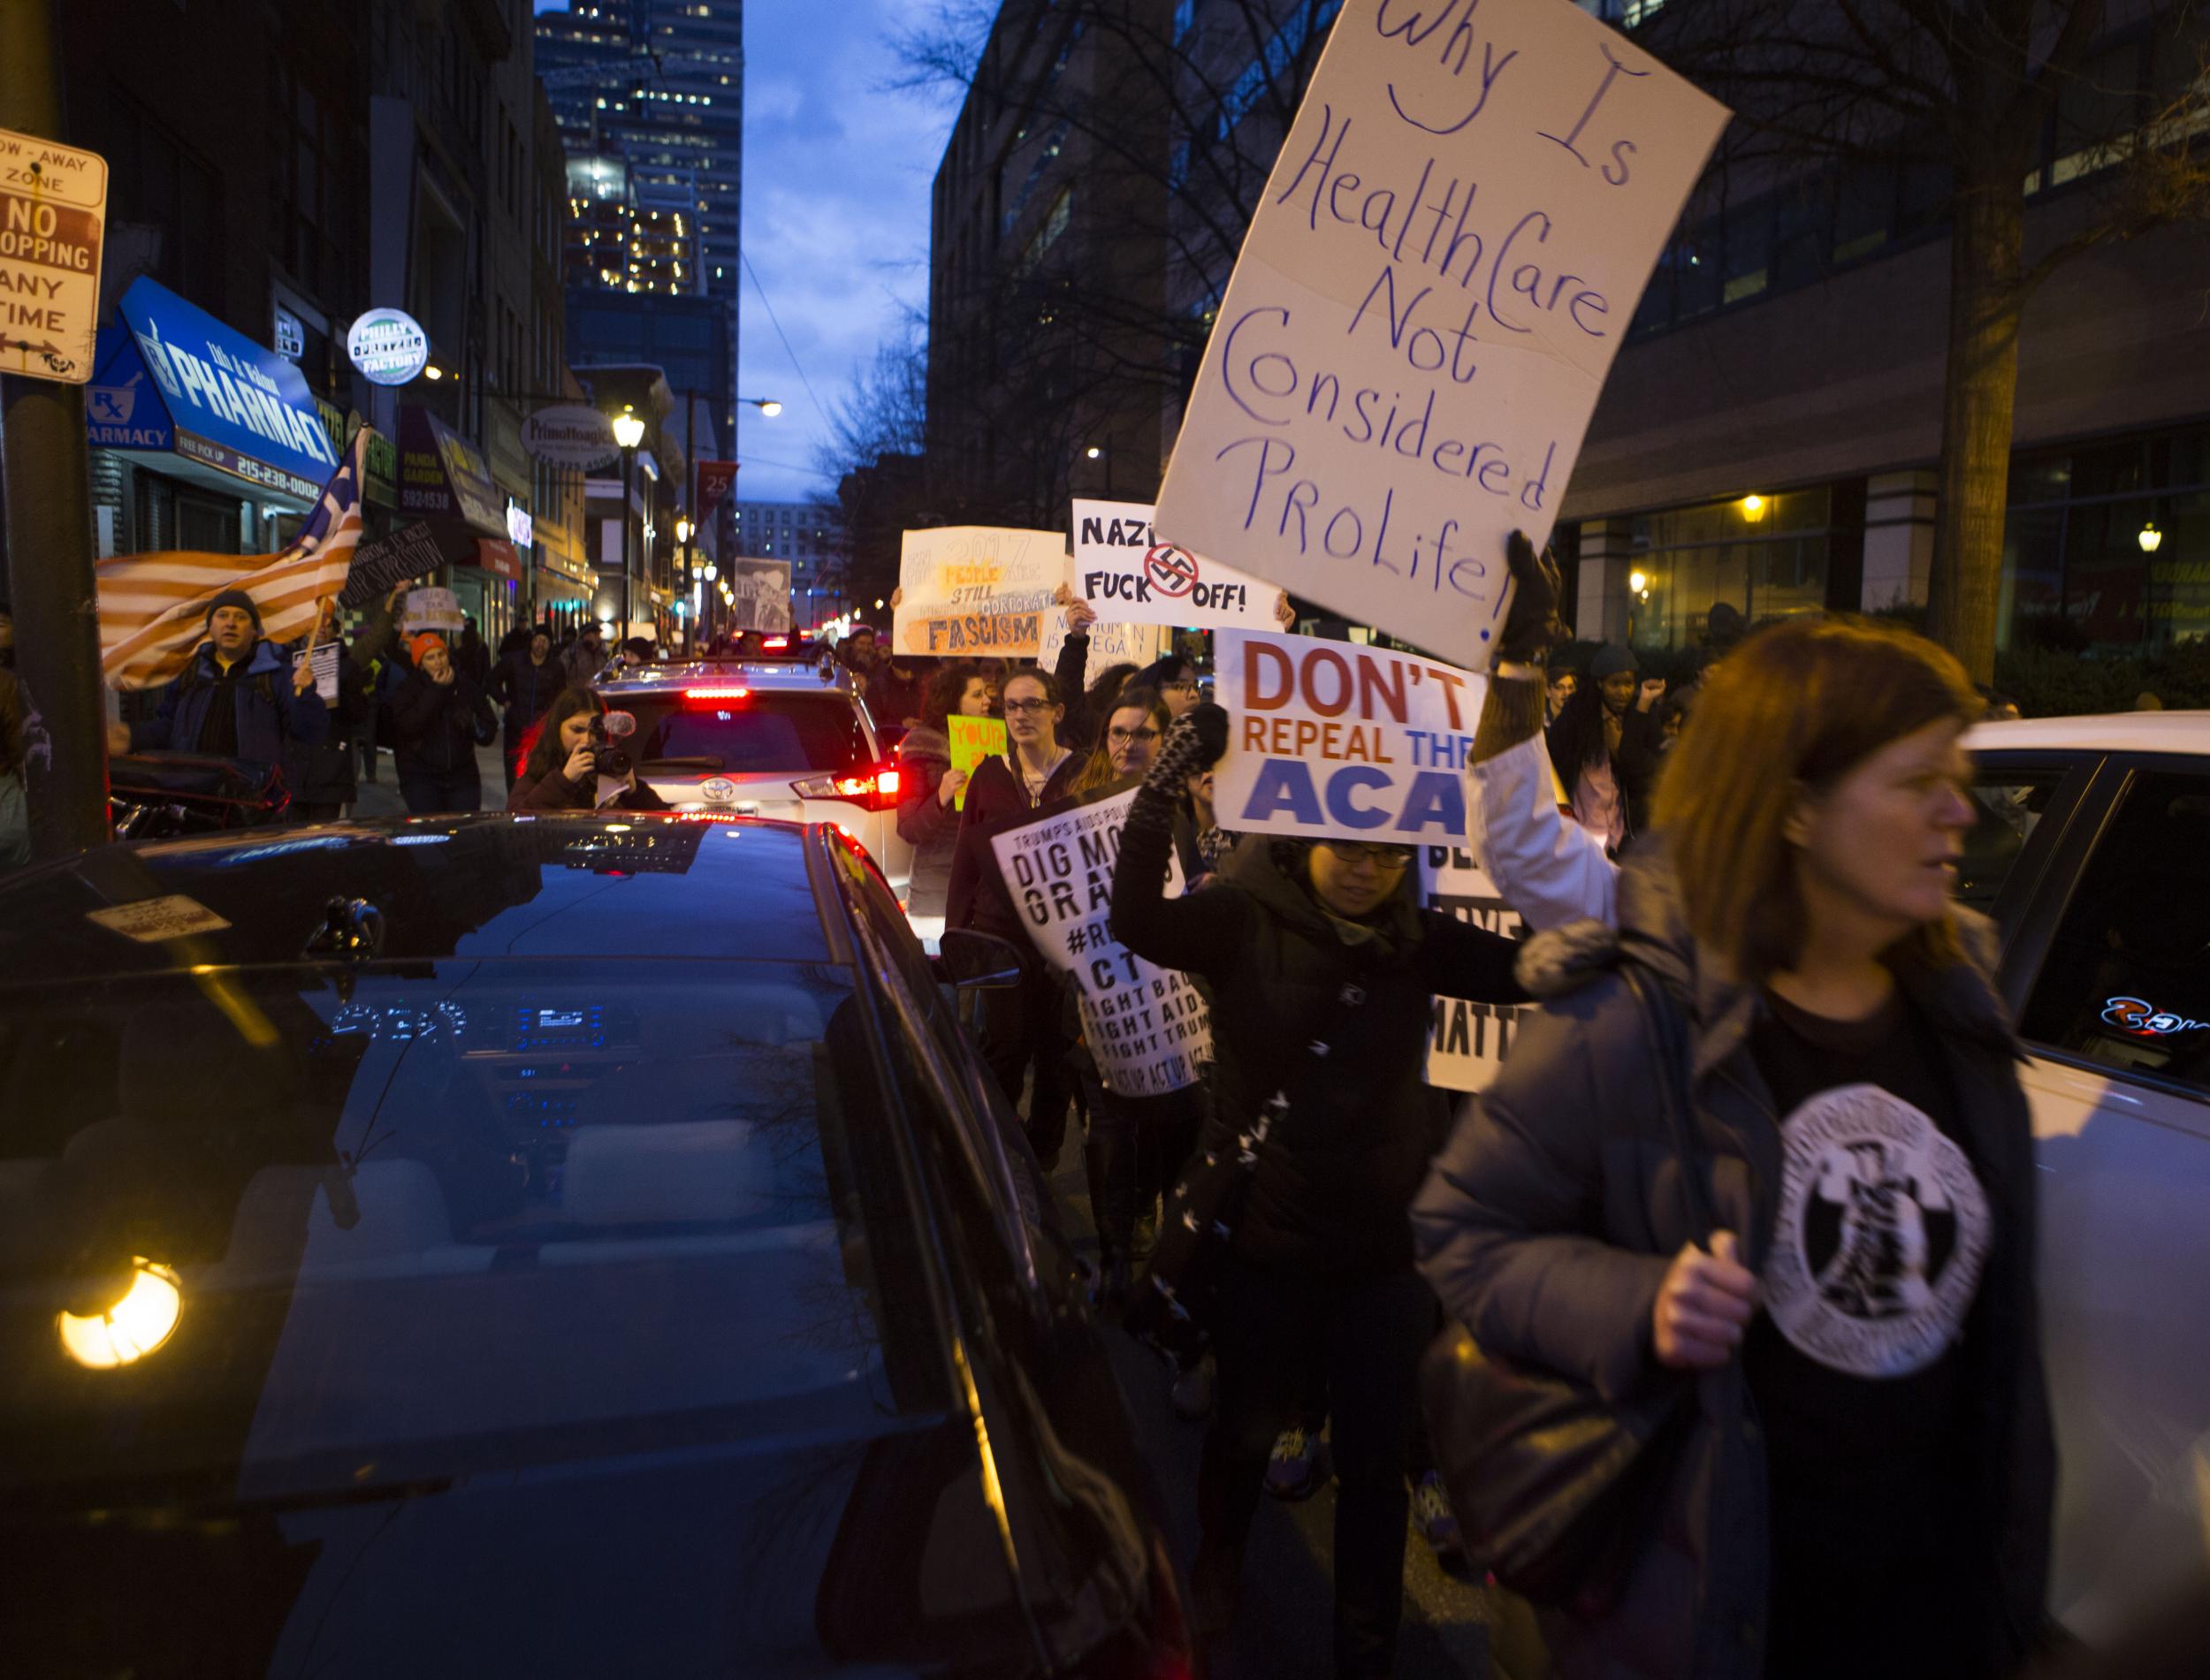 Protesters and activists march through downtown Philadelphia during the Republican retreat